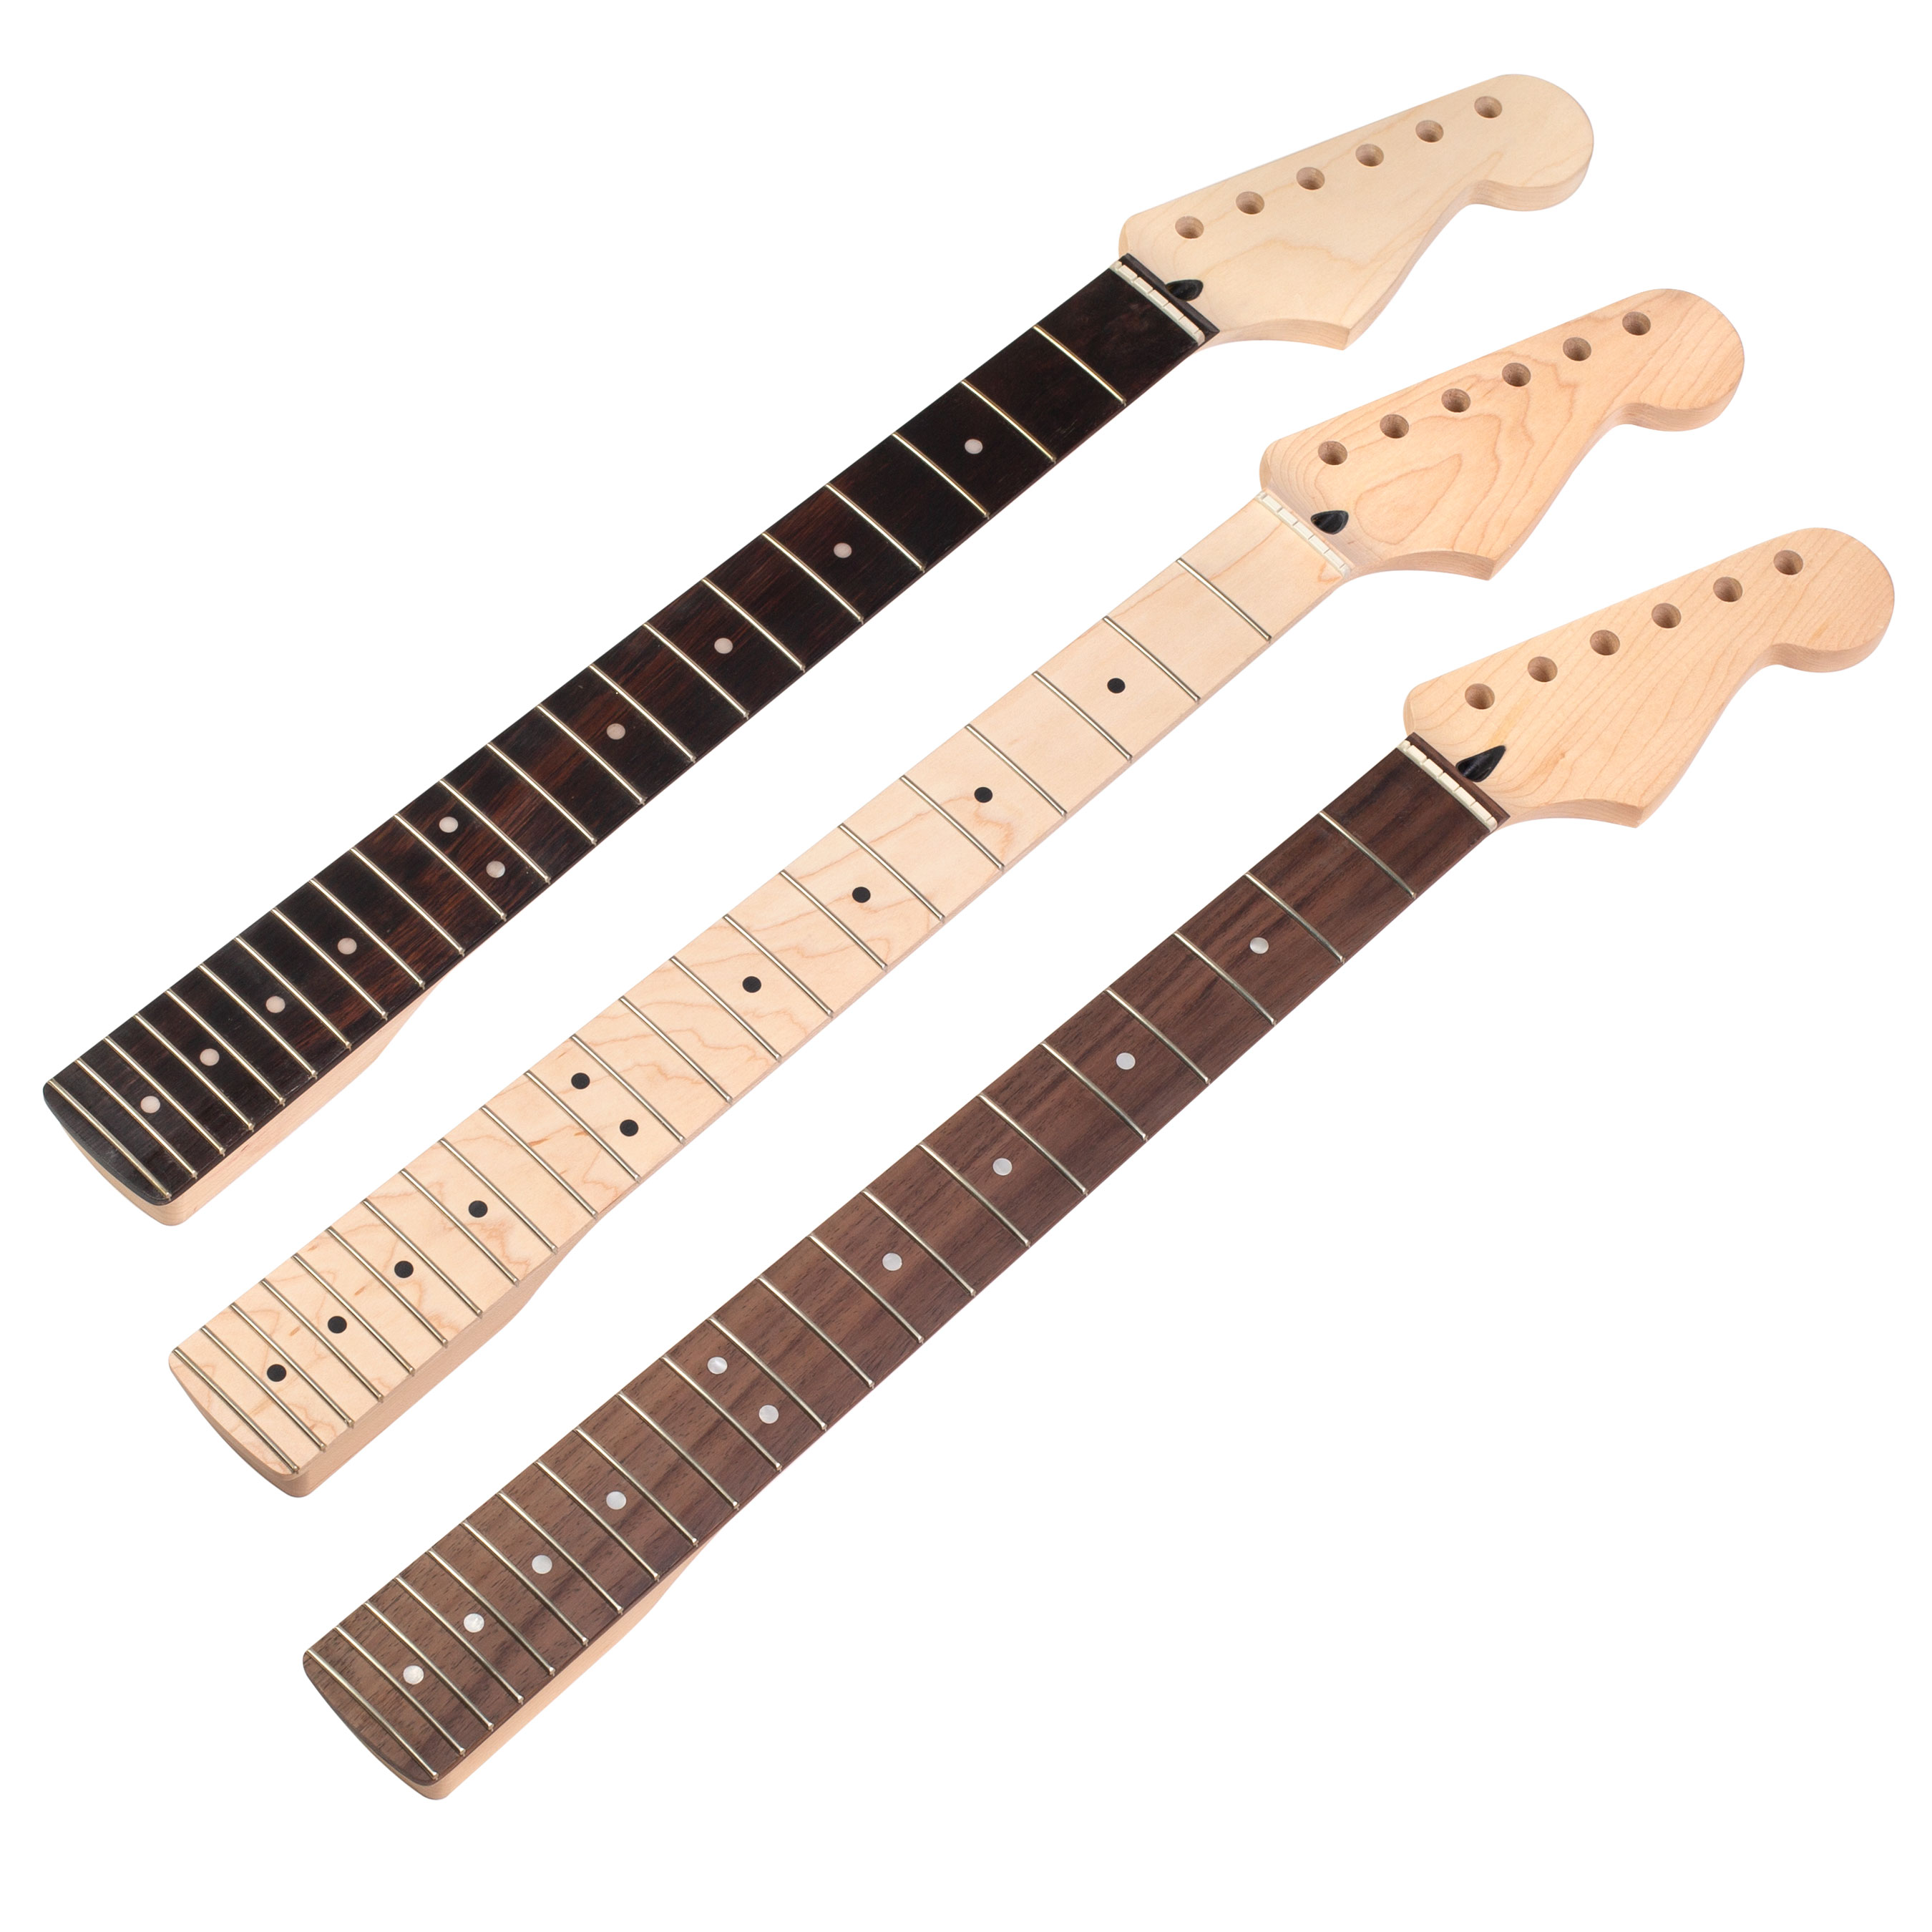 Mighty Mite Neck for Strat Guitar, Indian Rosewood fingerboard